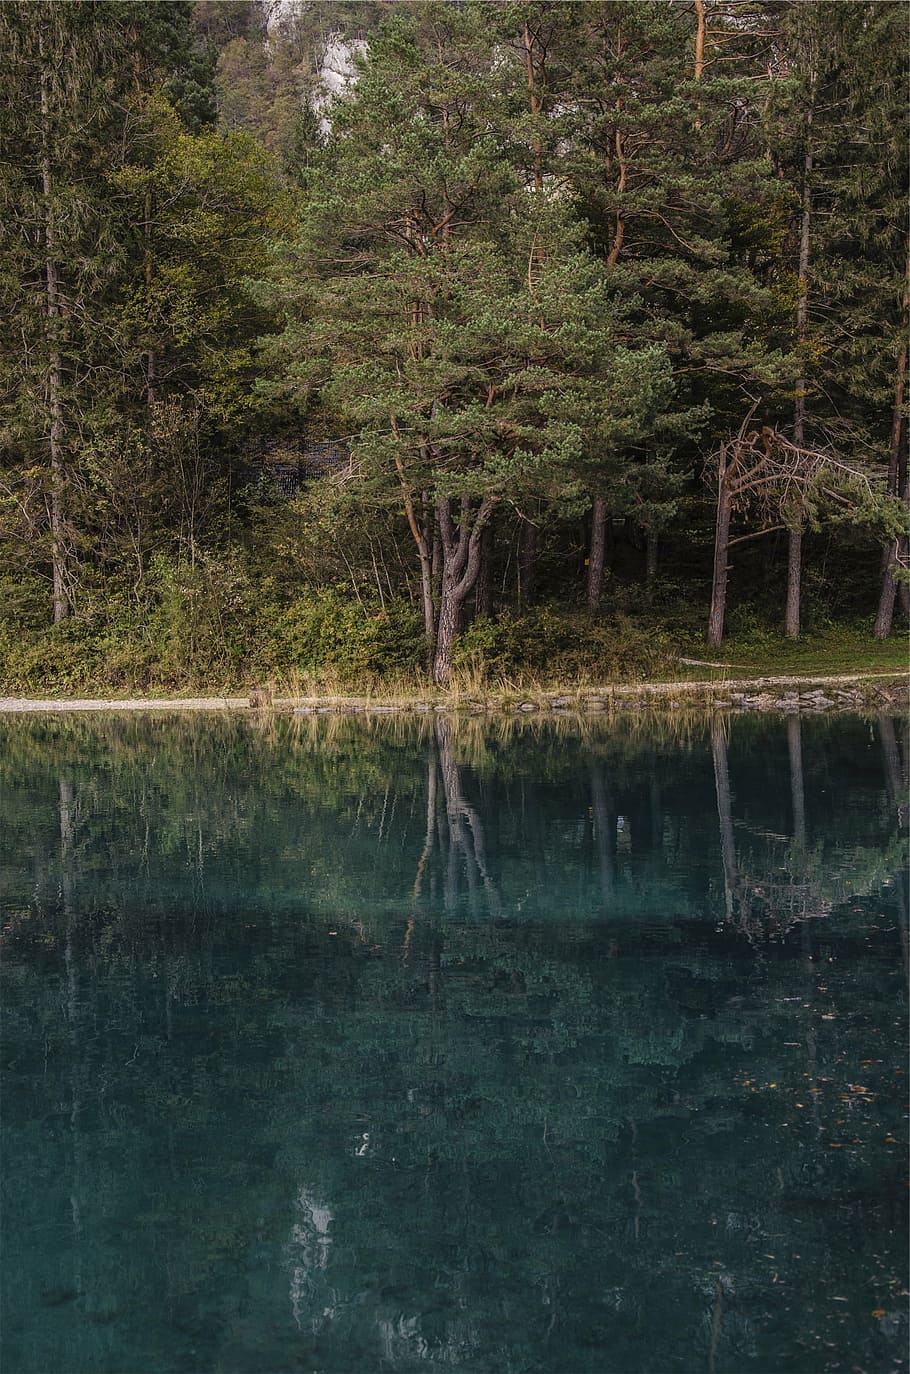 forest, body, water, trees, daytime, lake, reflection, nature, tree, outdoors